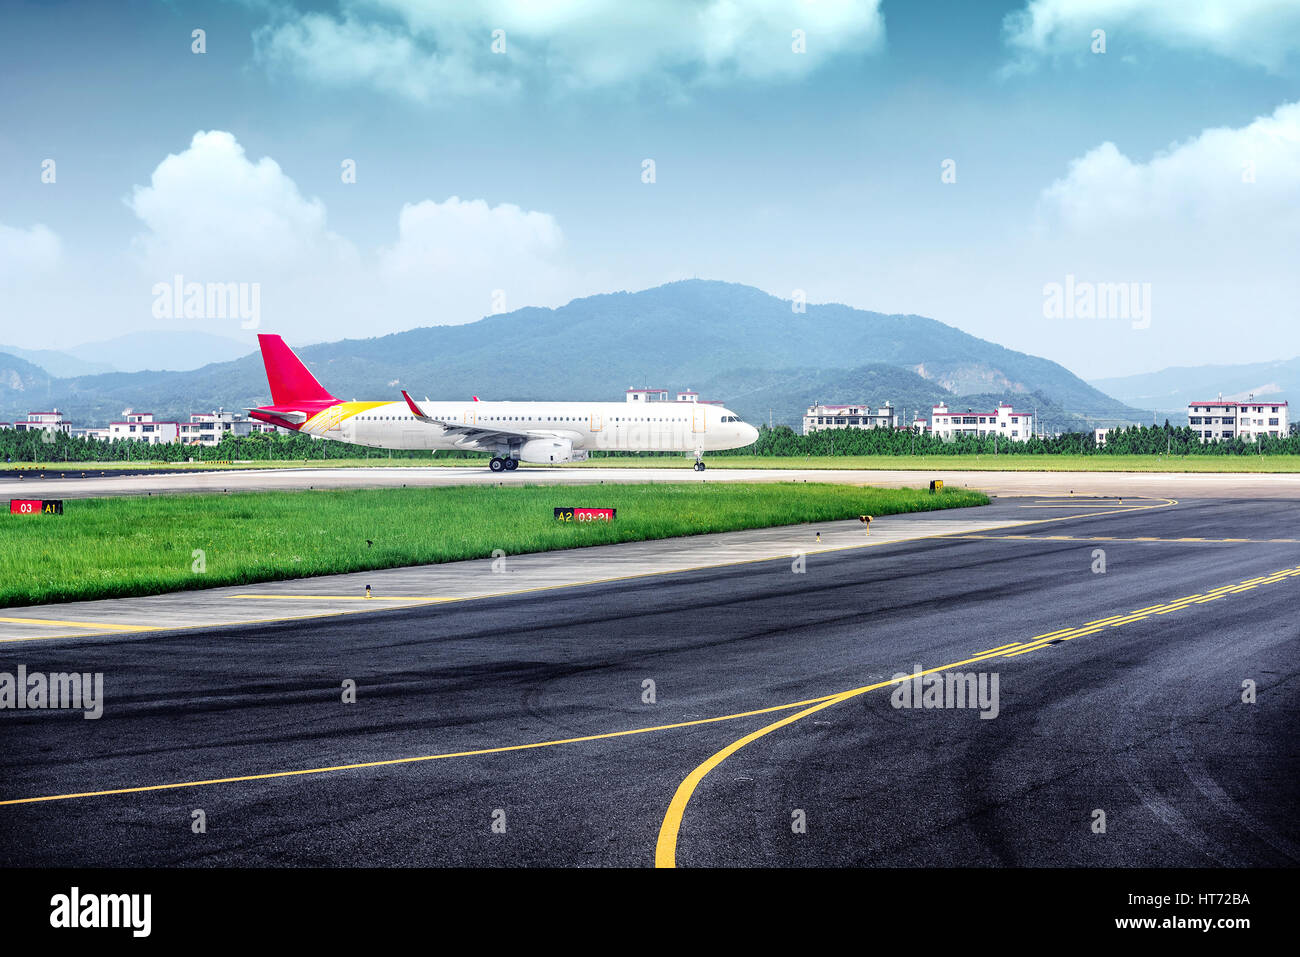 vehicles and ariplane parking in airport ramp in cloudy sky Stock Photo